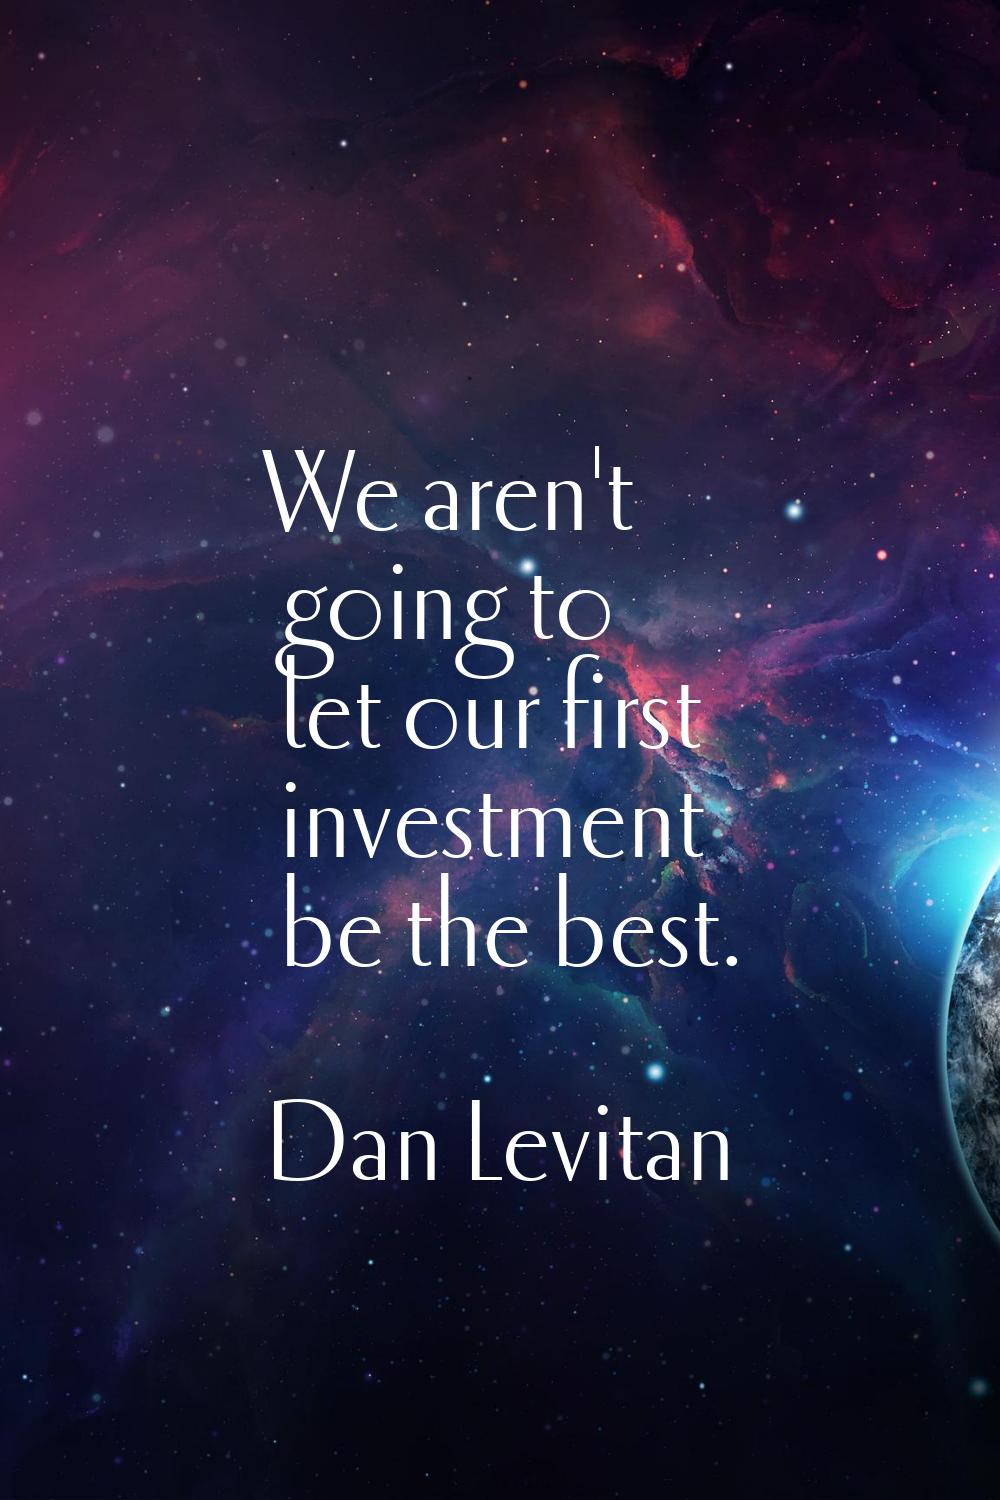 We aren't going to let our first investment be the best.